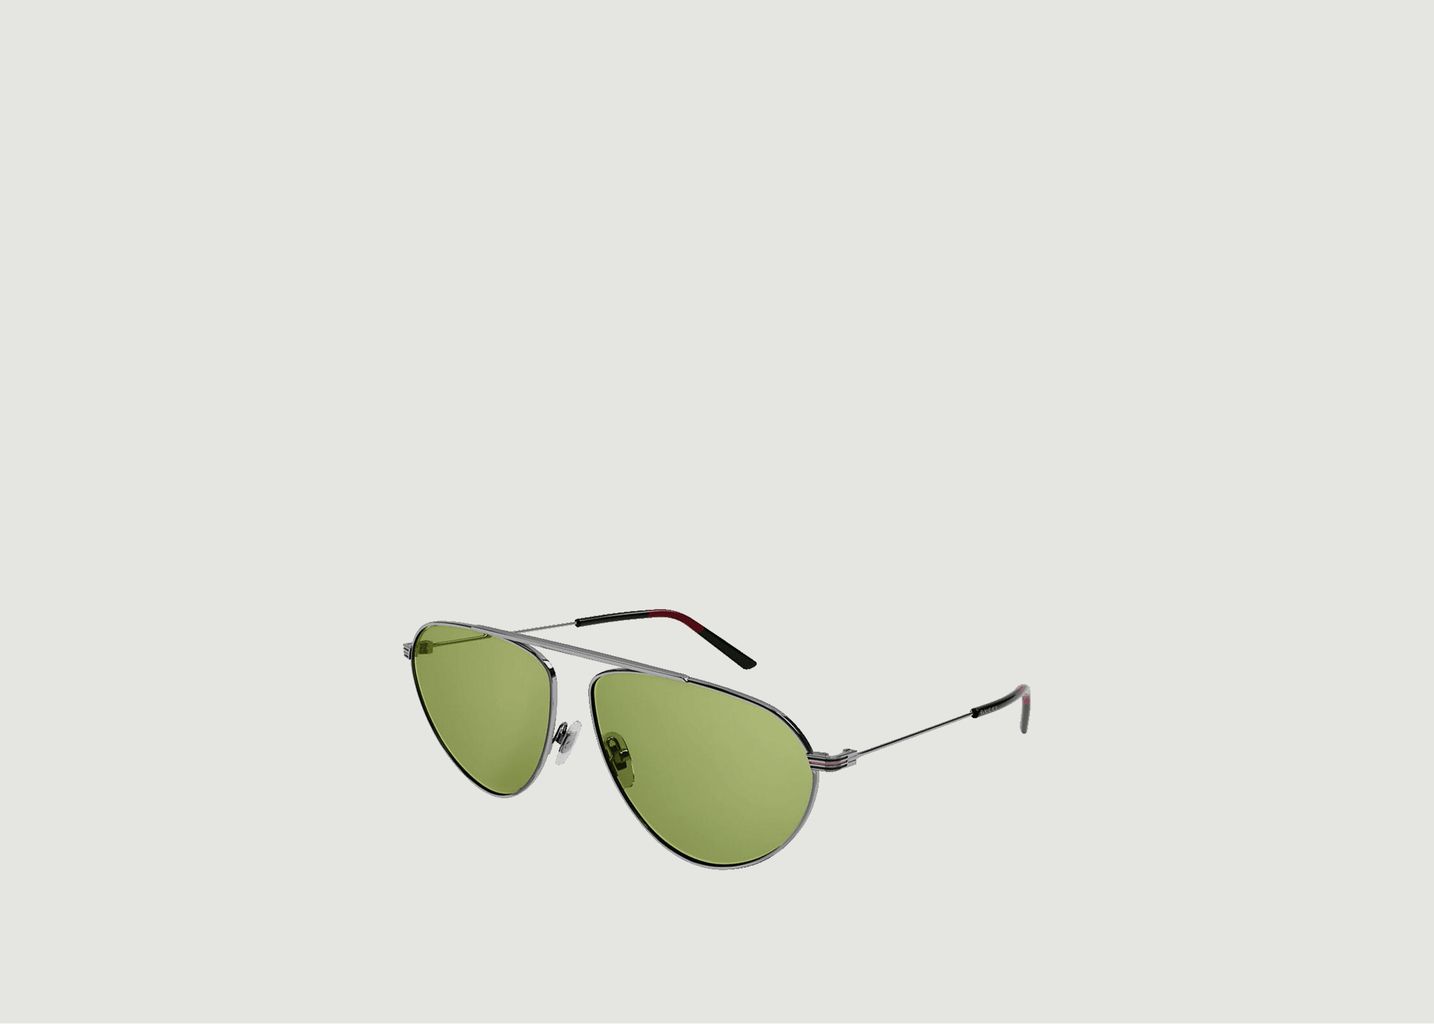 Metal sunglasses with colored lenses - Gucci